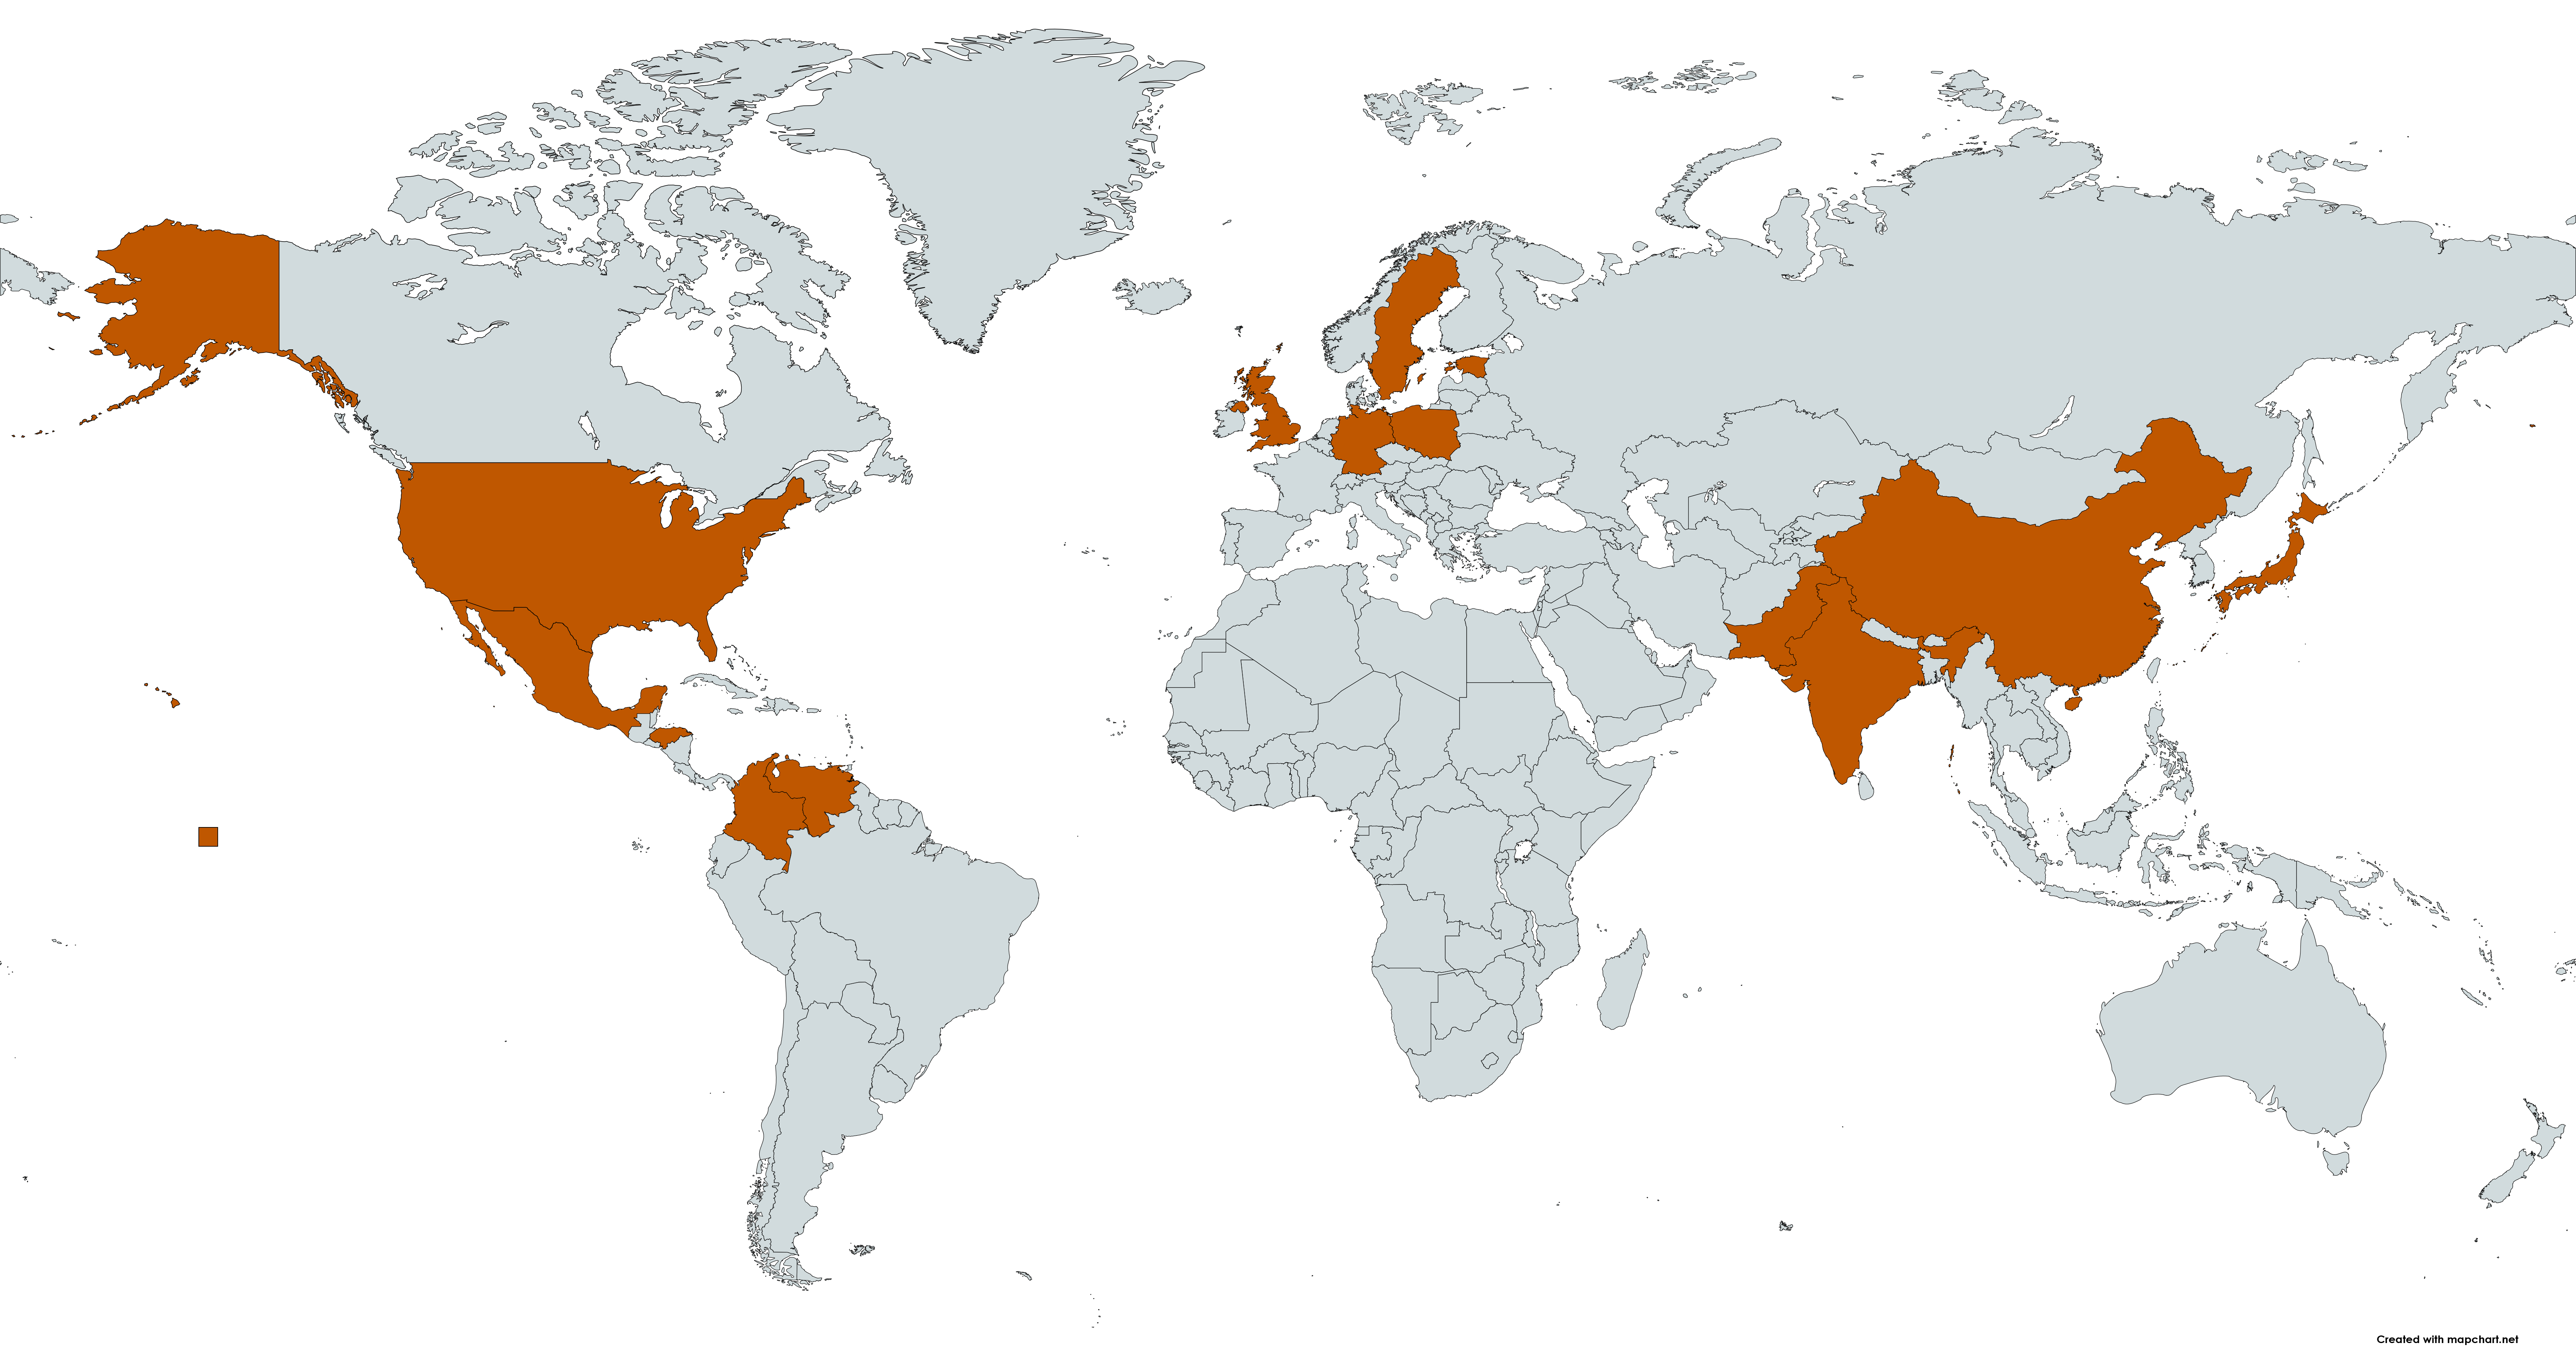 World Map of Home Countries of LLM Students at The University of Texas School of Law